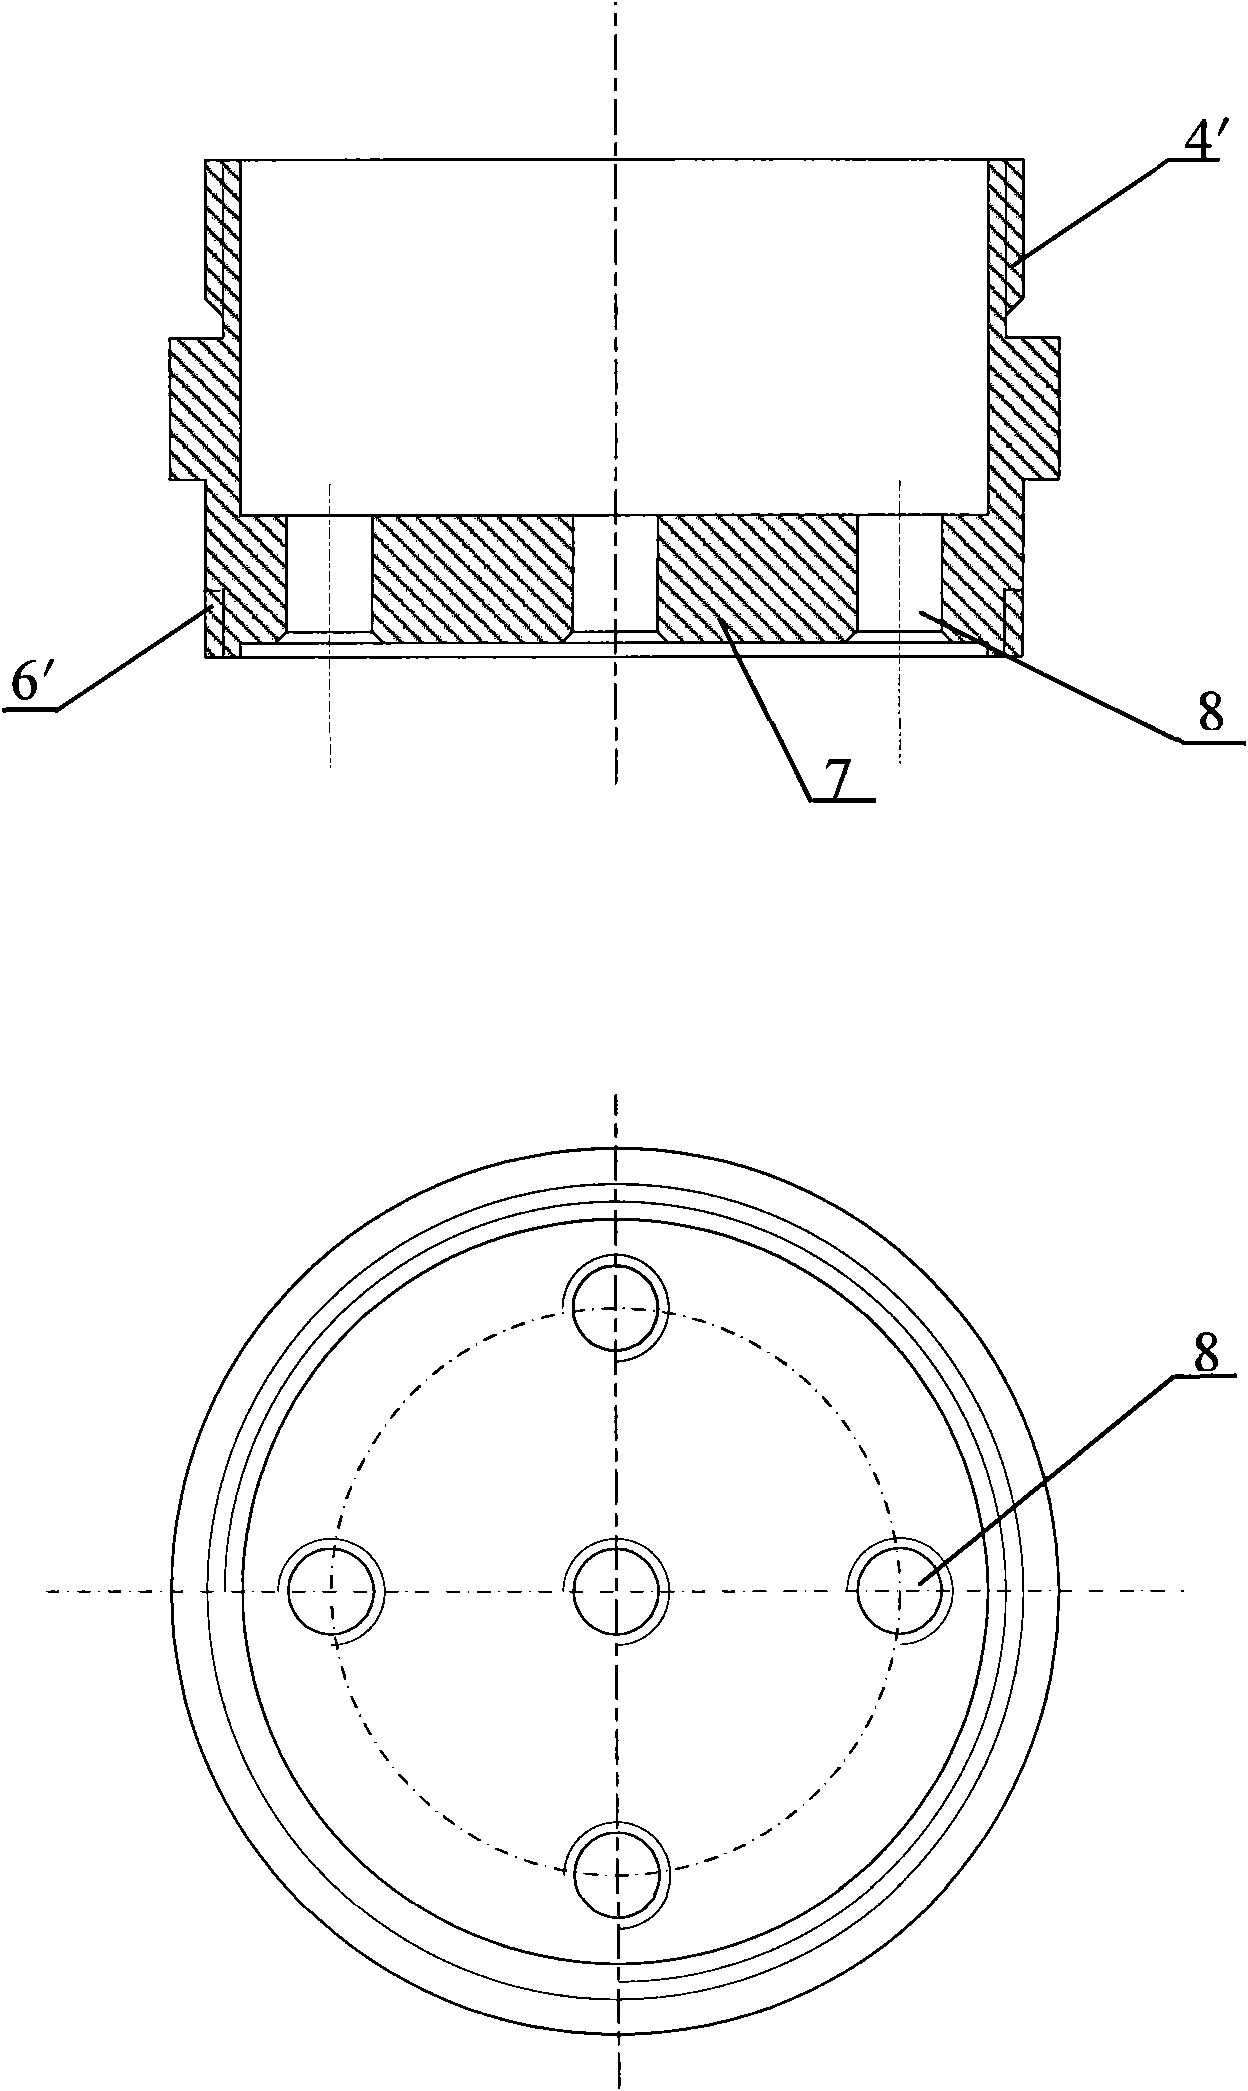 Ball dropper used for drop ball forming of oxide